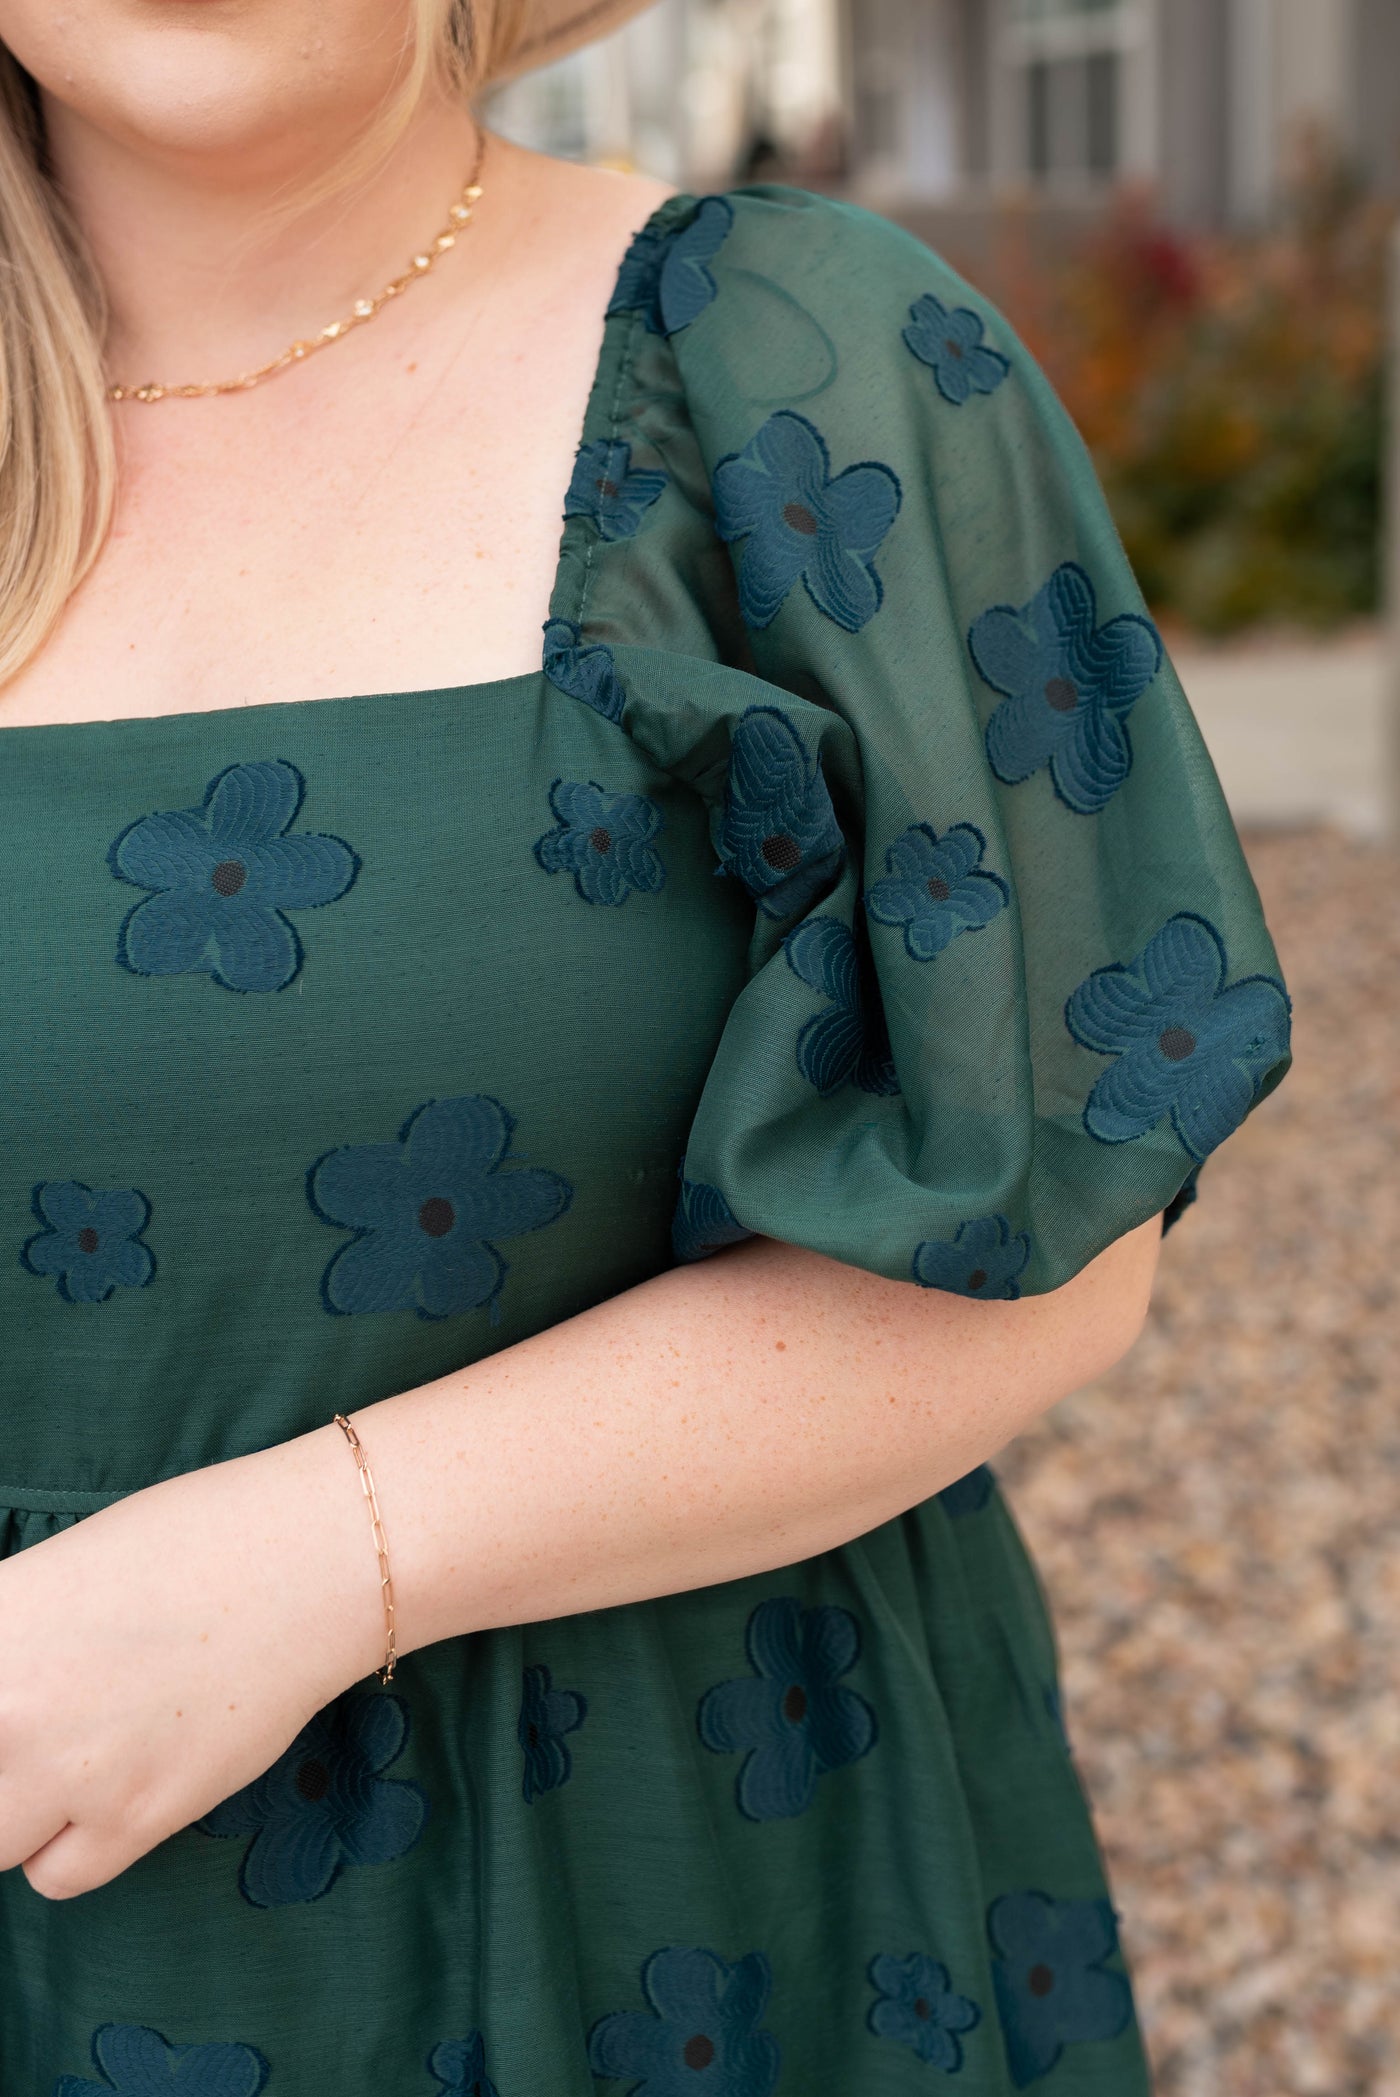 Full sleeve of the plus size hunter green floral dress